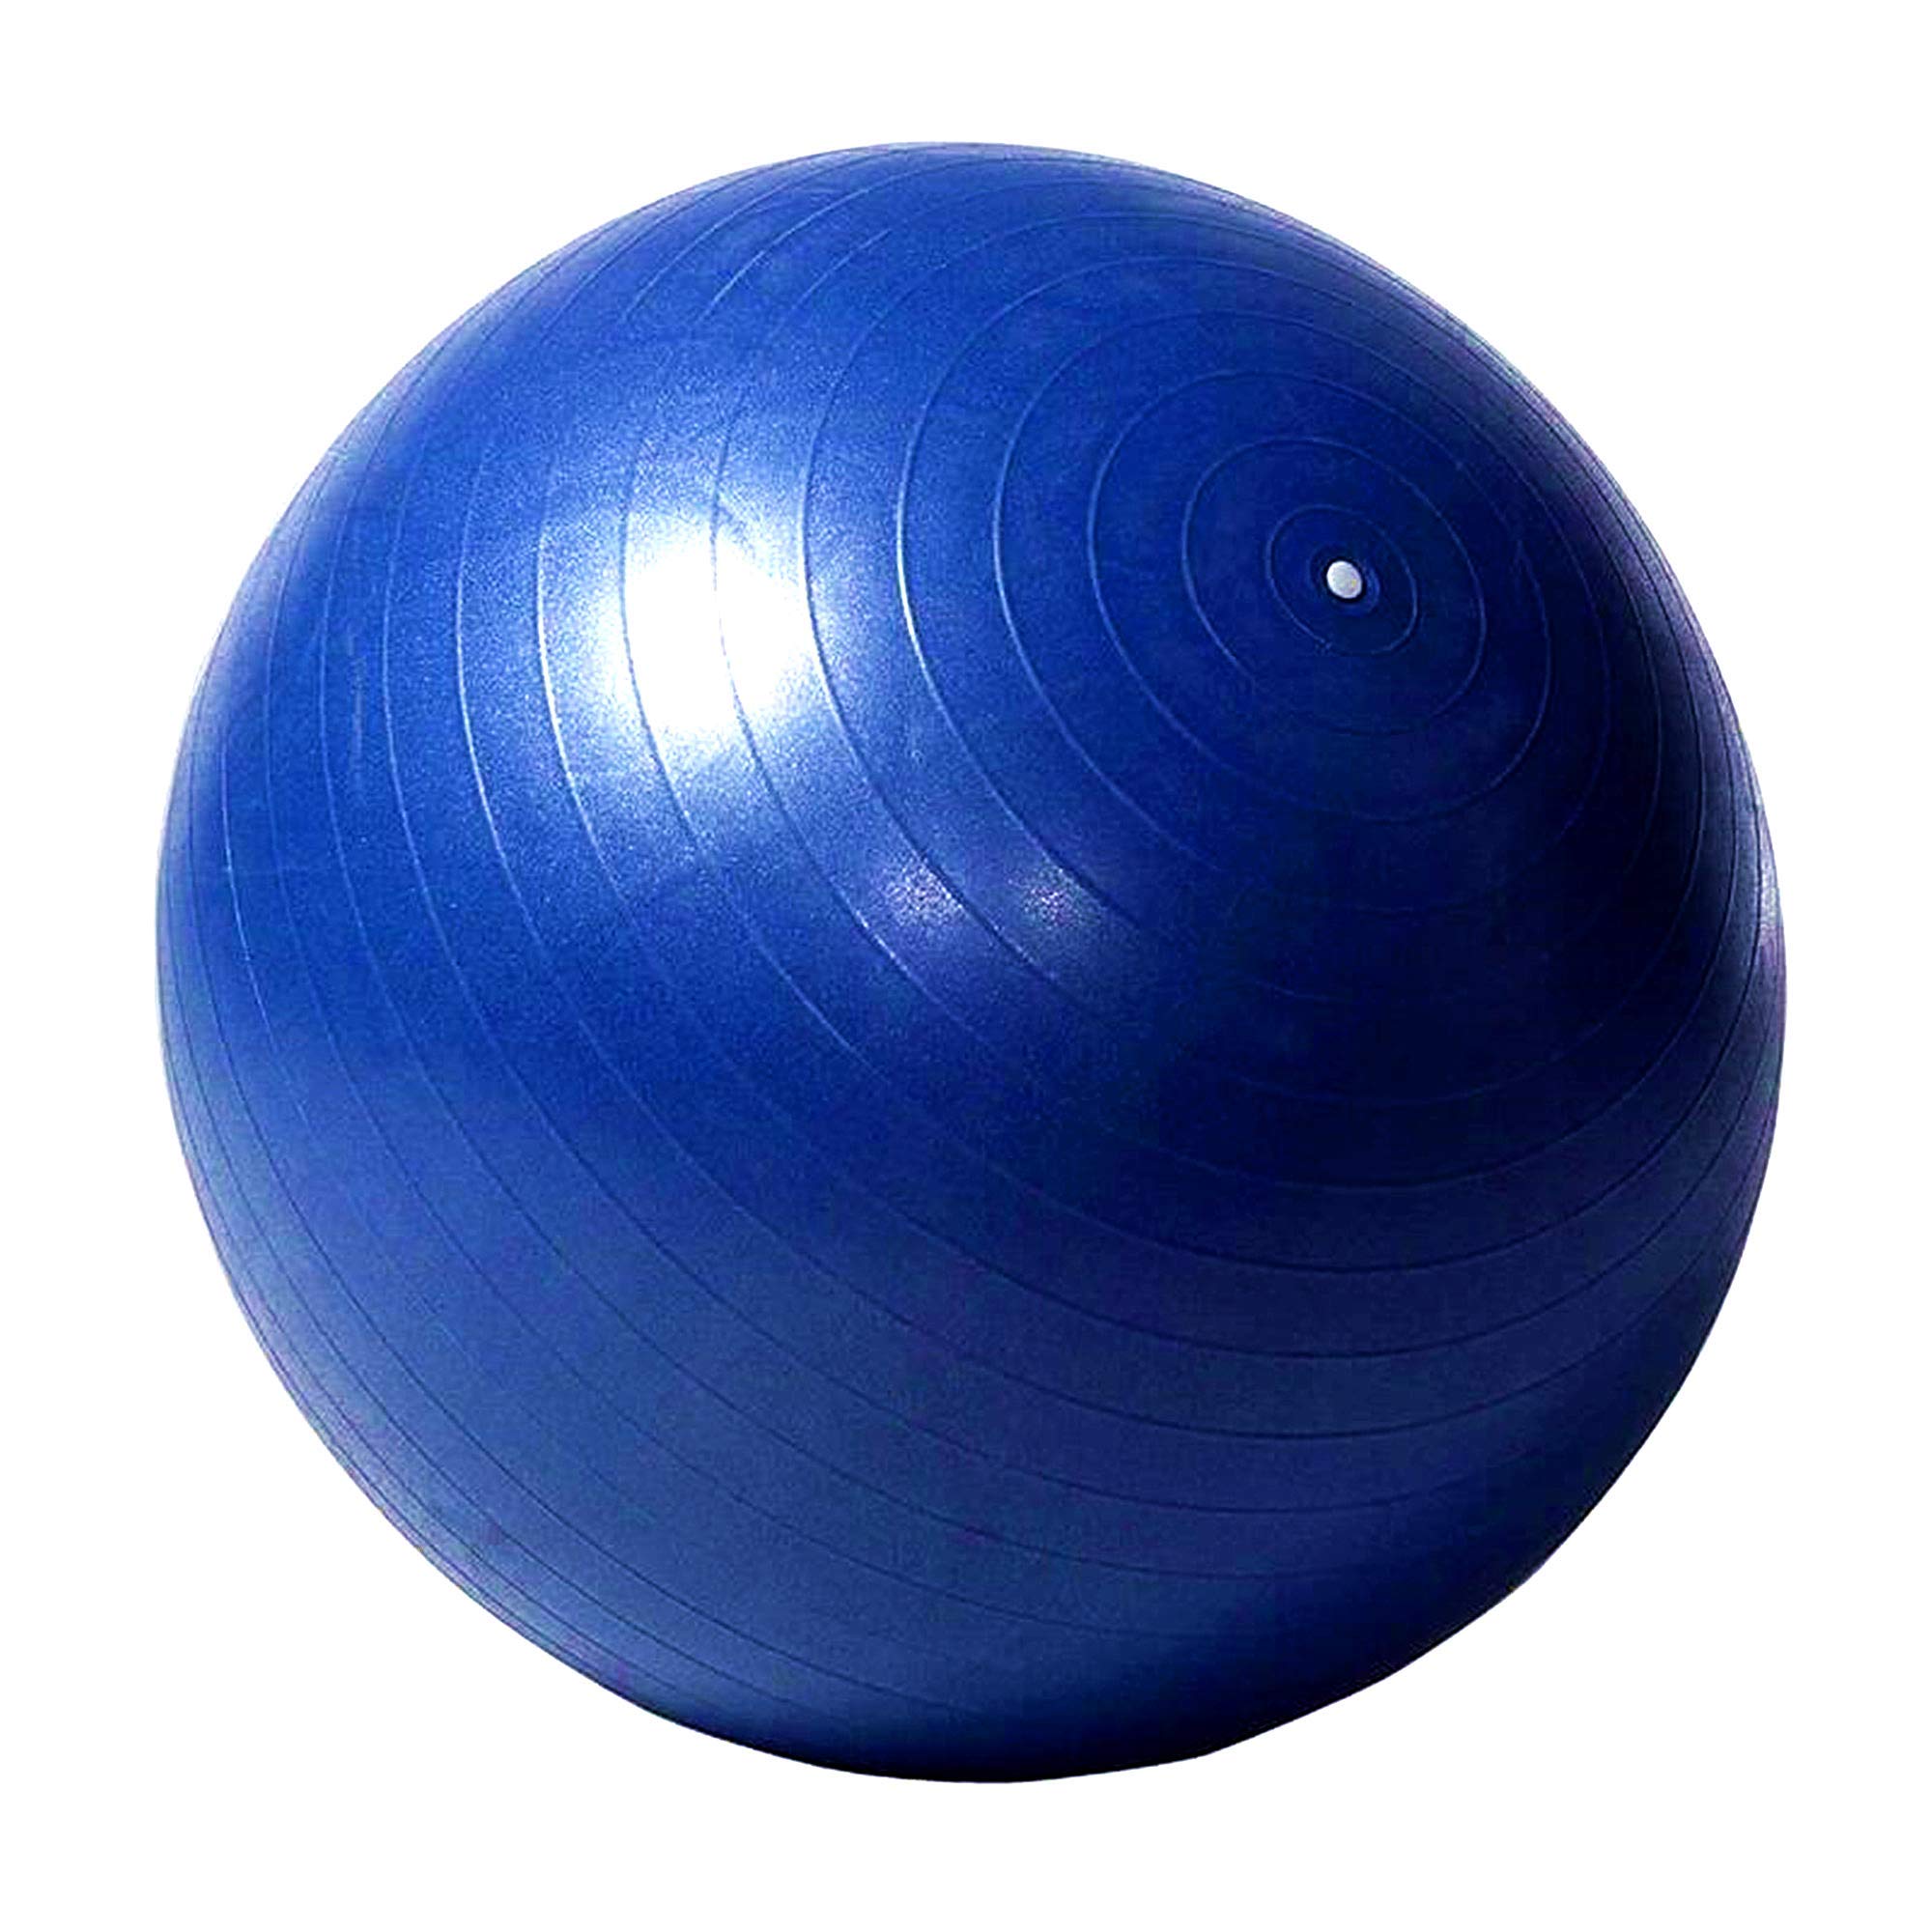 SWYIVY 30 Inch Horse Ball Toy Mega Herding Ball Giant Horse Soccer, Pump Included